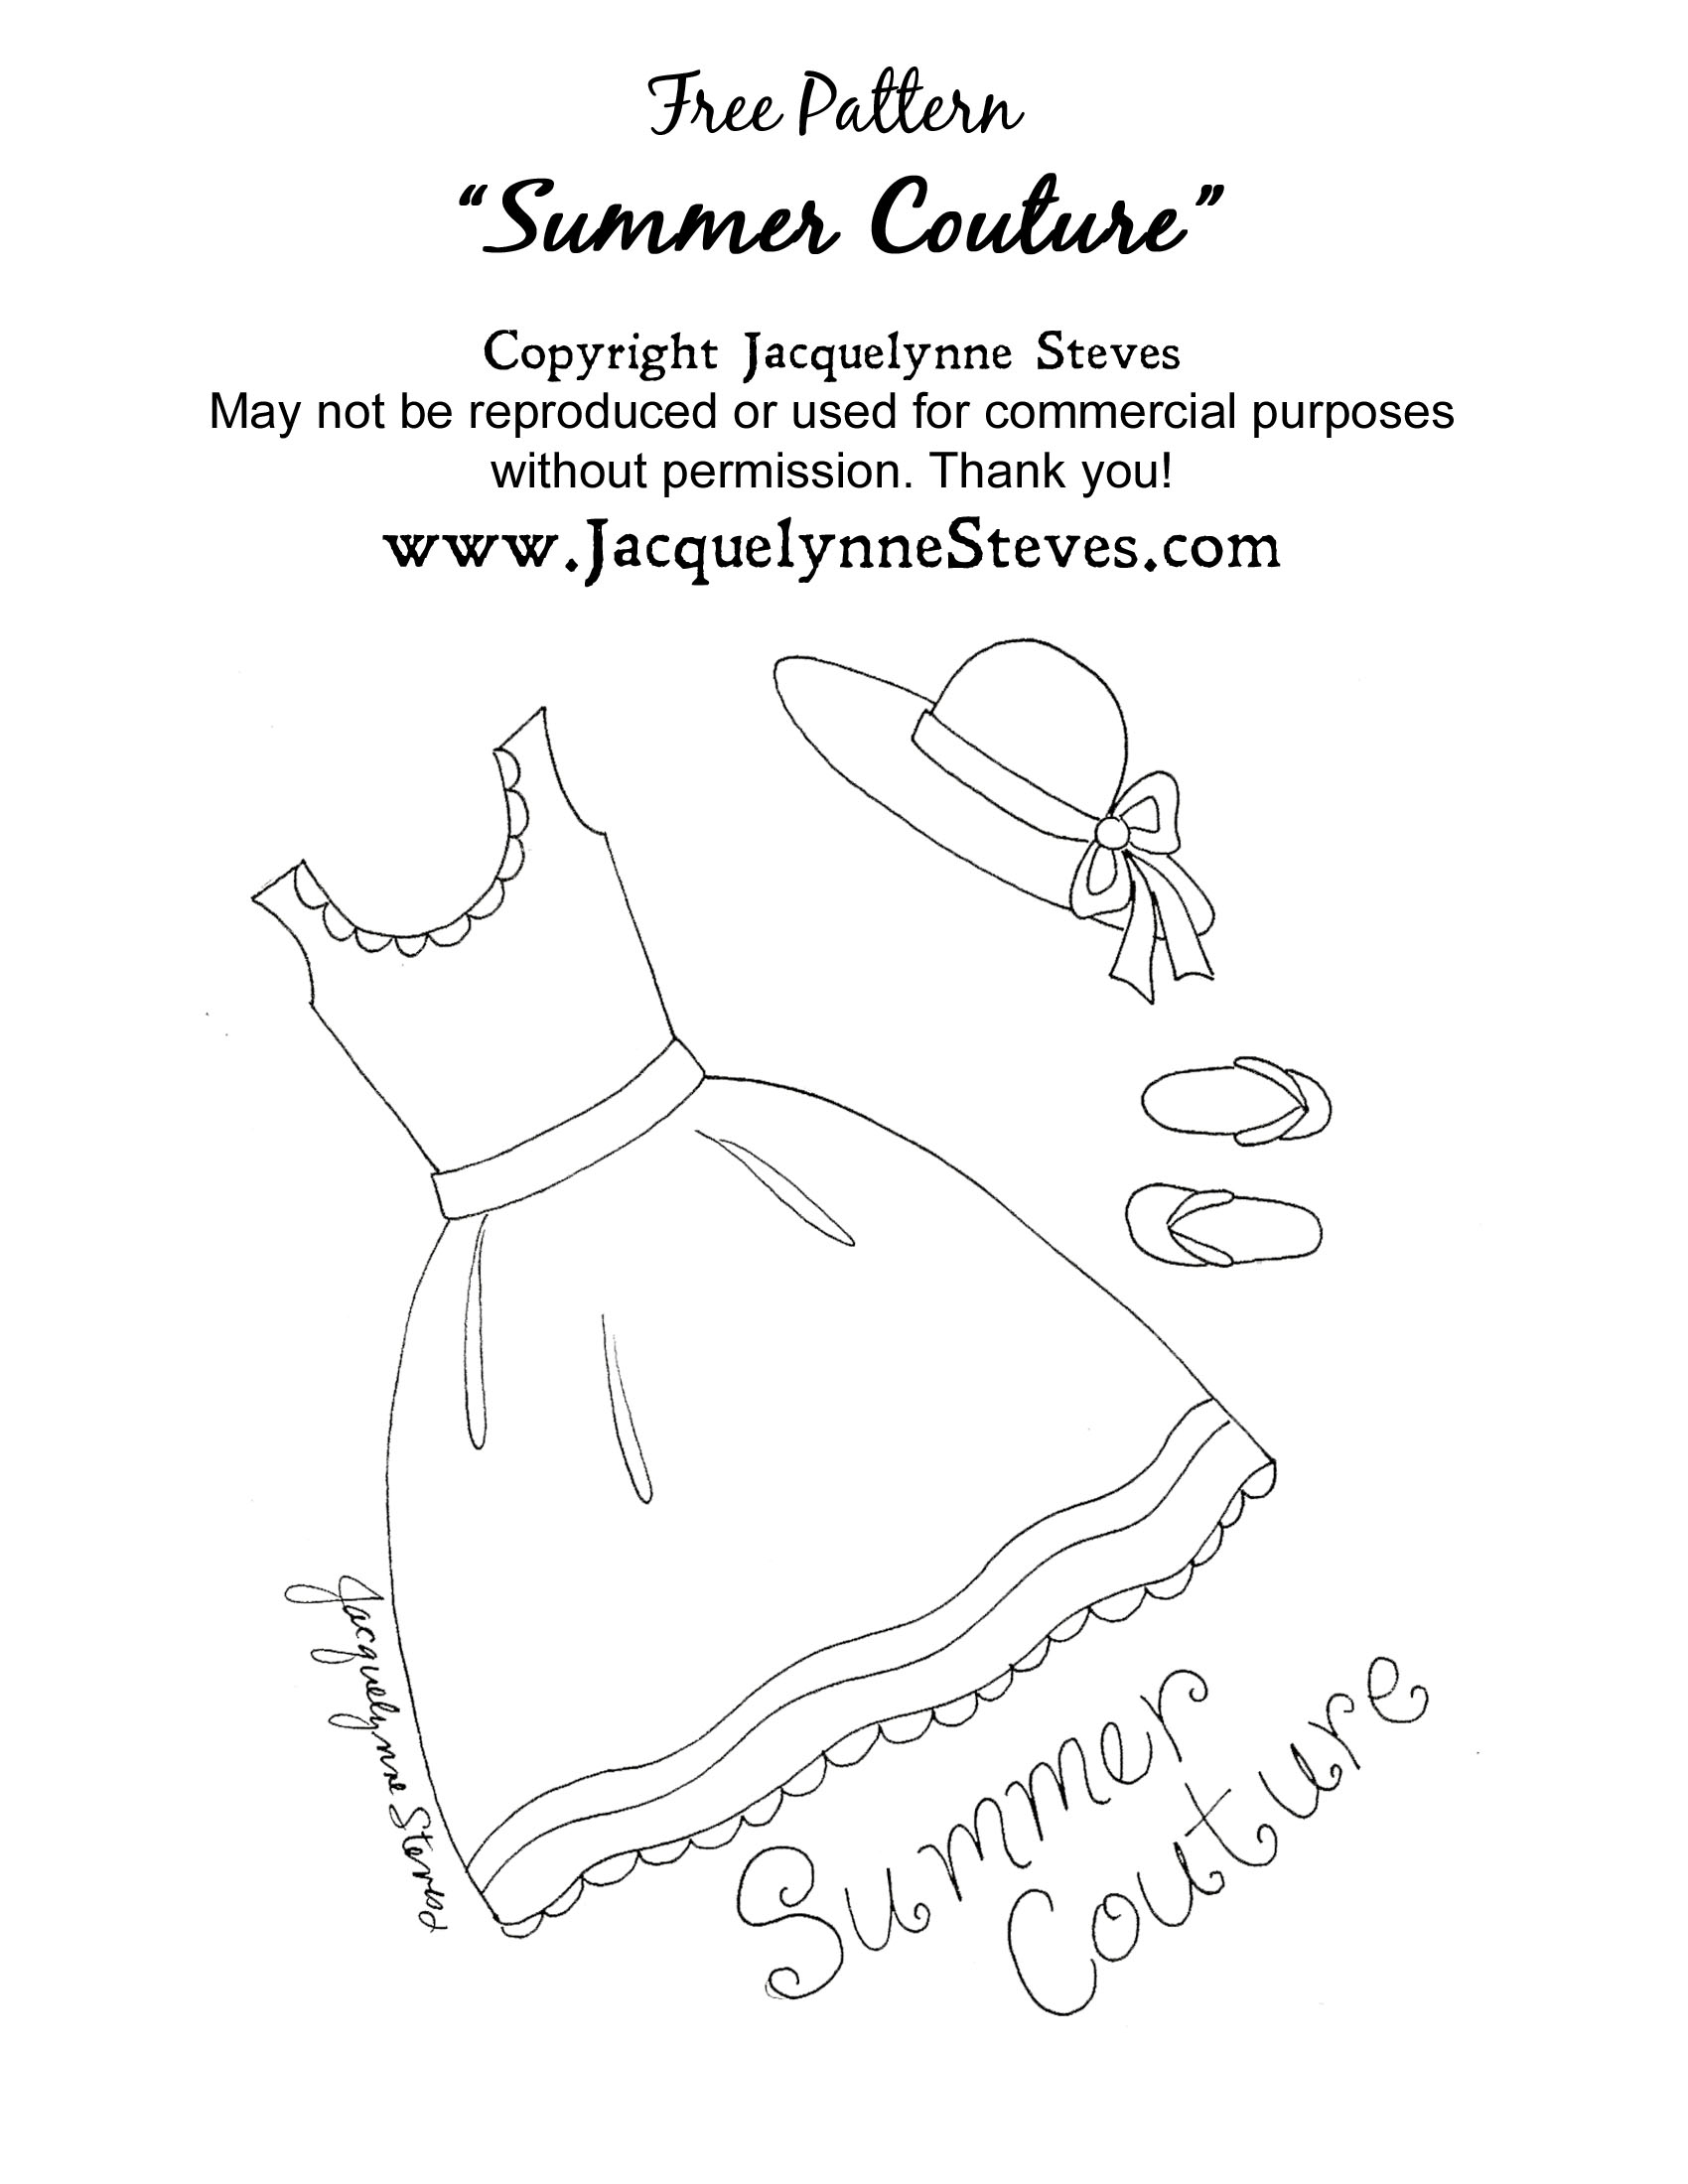 Embroidery Dress Patterns Free Summer Couture Embroidery Pattern Jacquelynne Steves